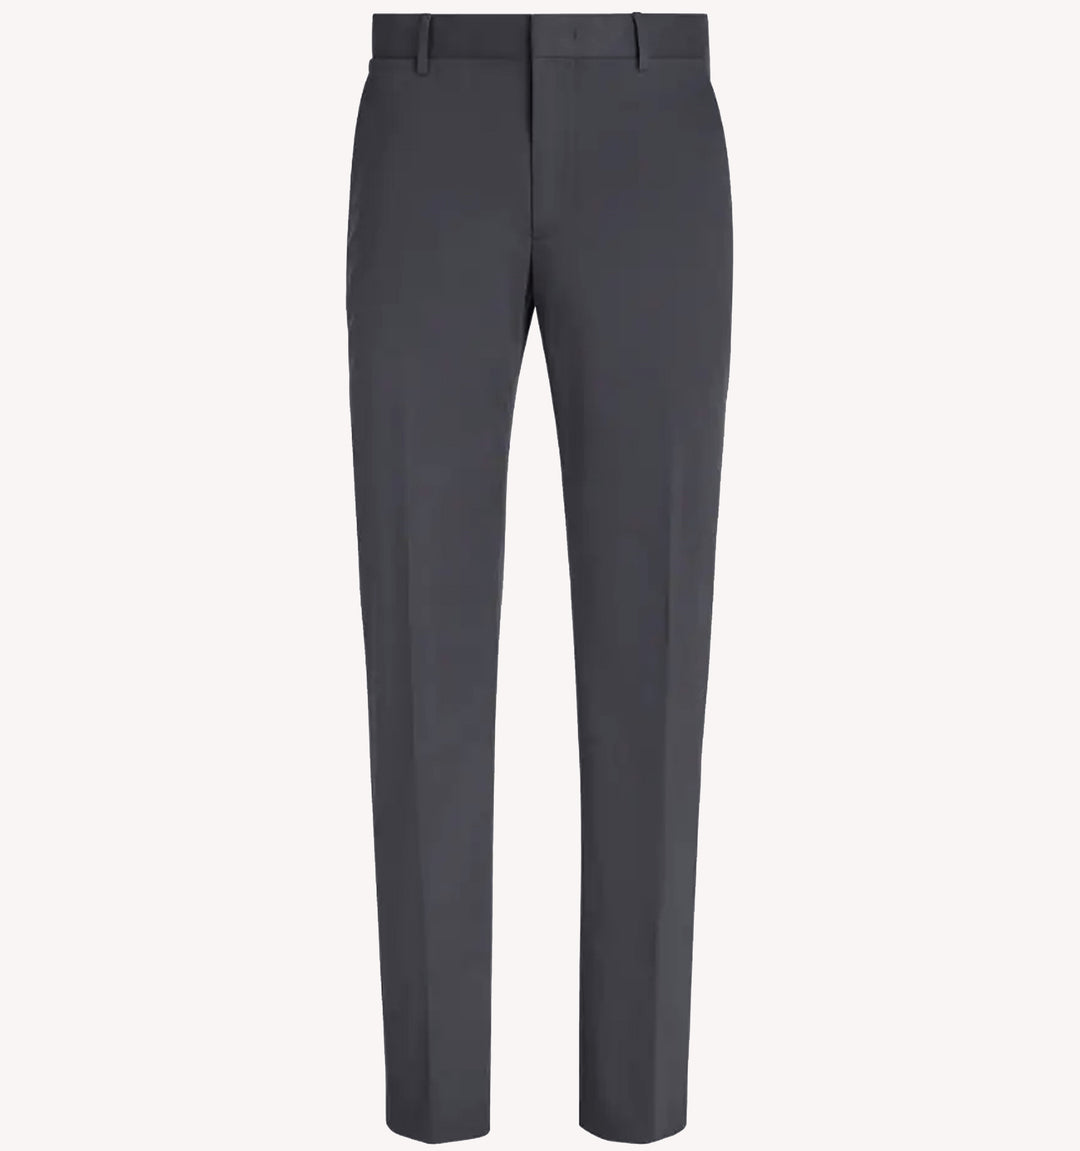 Zegna Sport Trousers in Navy